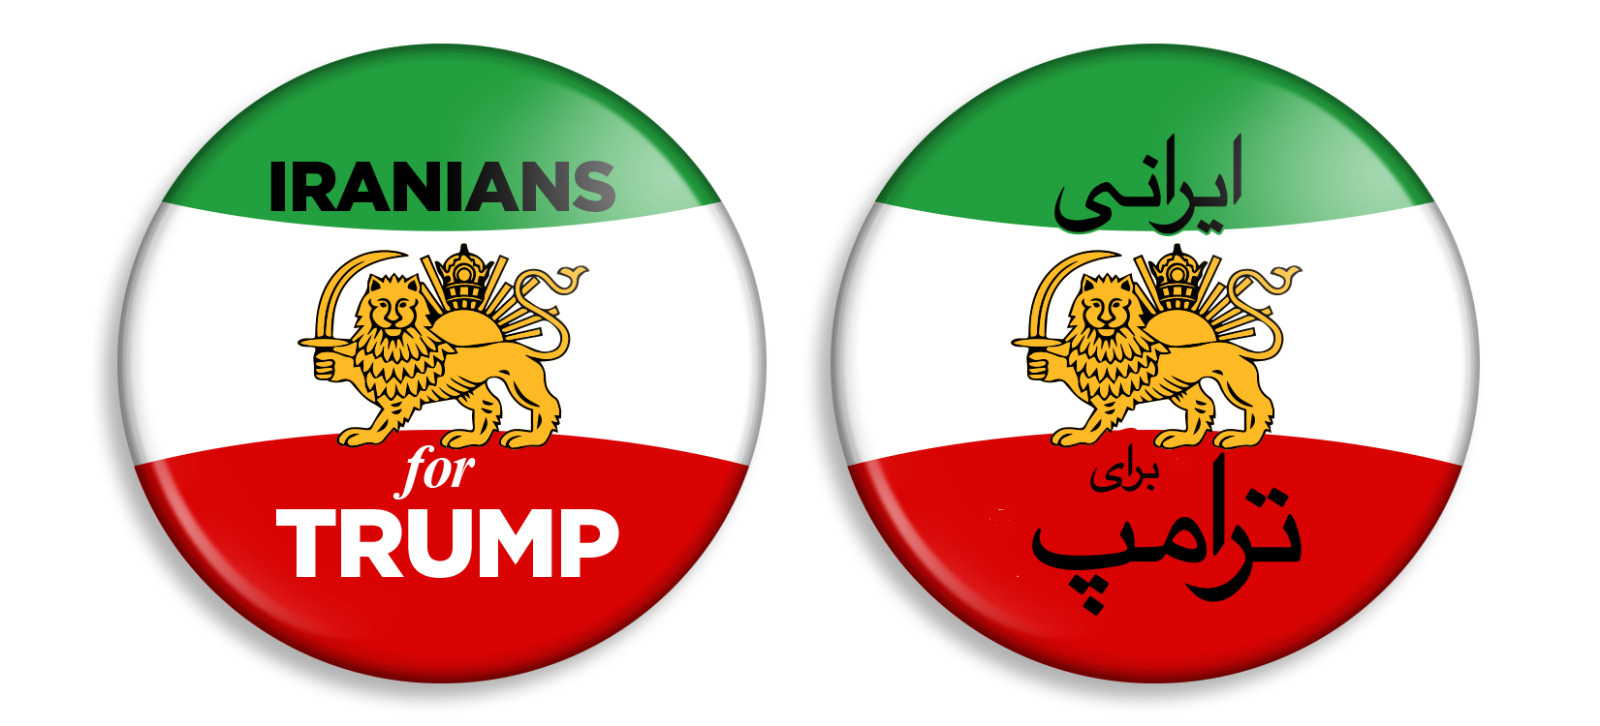 2020 Campaign Buttons – IRANIAN FOR TRUMP Vote for Trump – 2 Buttons